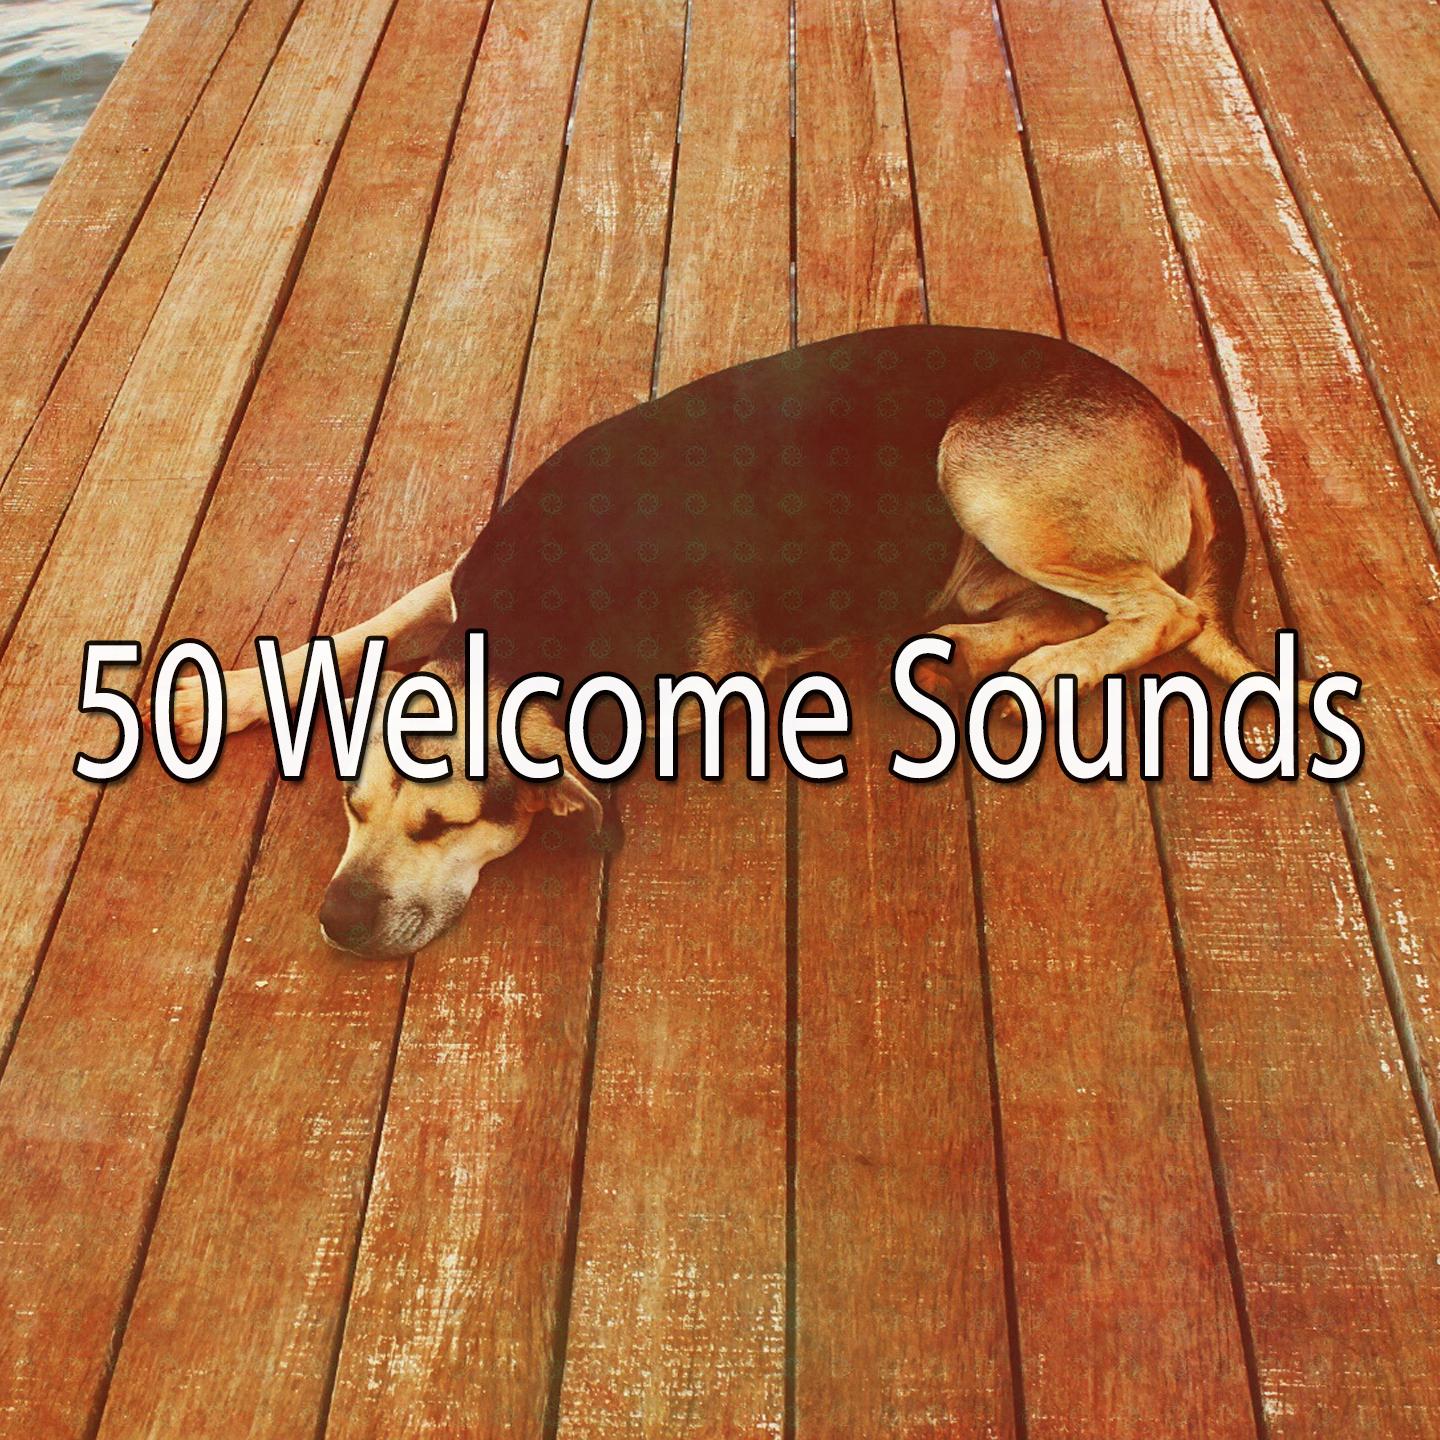 50 Welcome Sounds